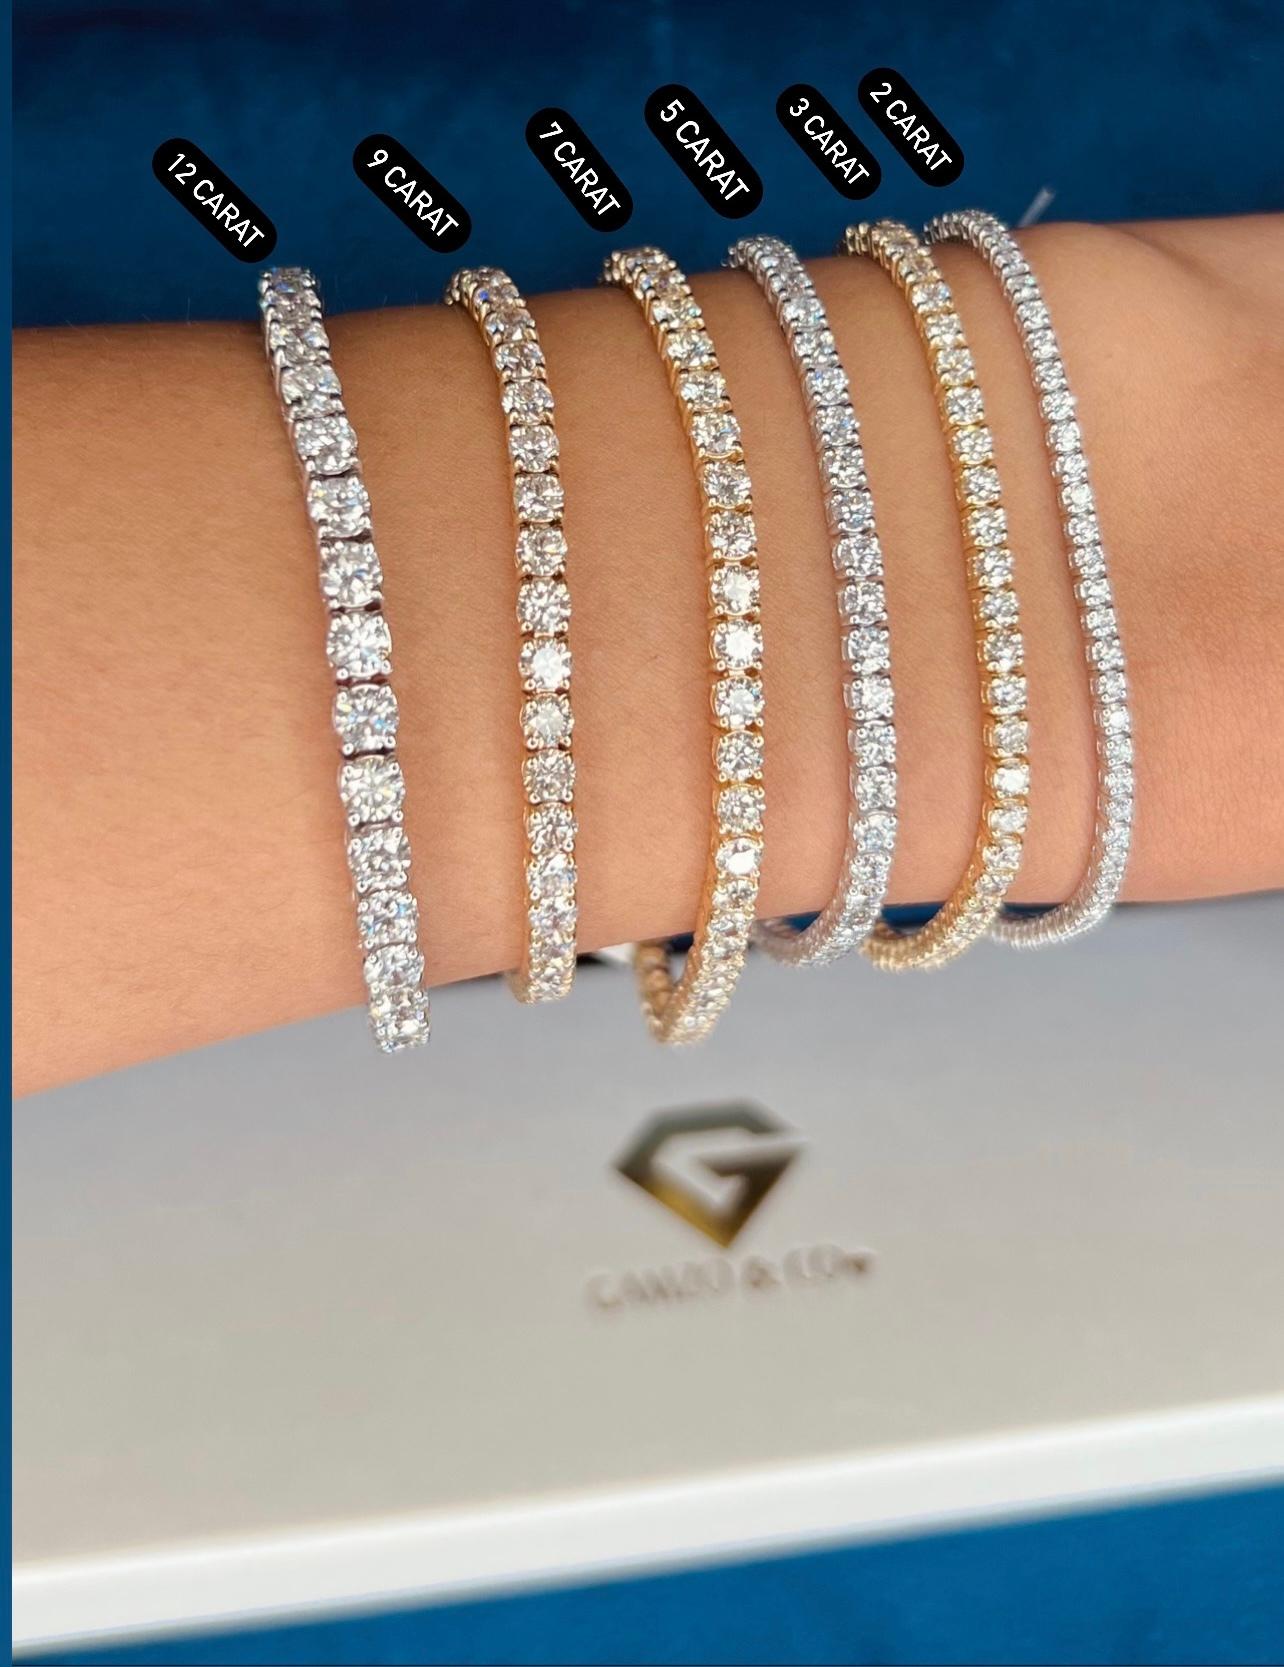 This diamond tennis bracelet features beautifully cut round diamonds set gorgeously in 14k gold.

Metal: 14k Gold
Diamond Cut: Round Natural Diamond 
Total Diamond Carats: 2ct
Diamond Clarity: VS
Diamond Color: F-G
Color: Yellow Gold
Bracelet